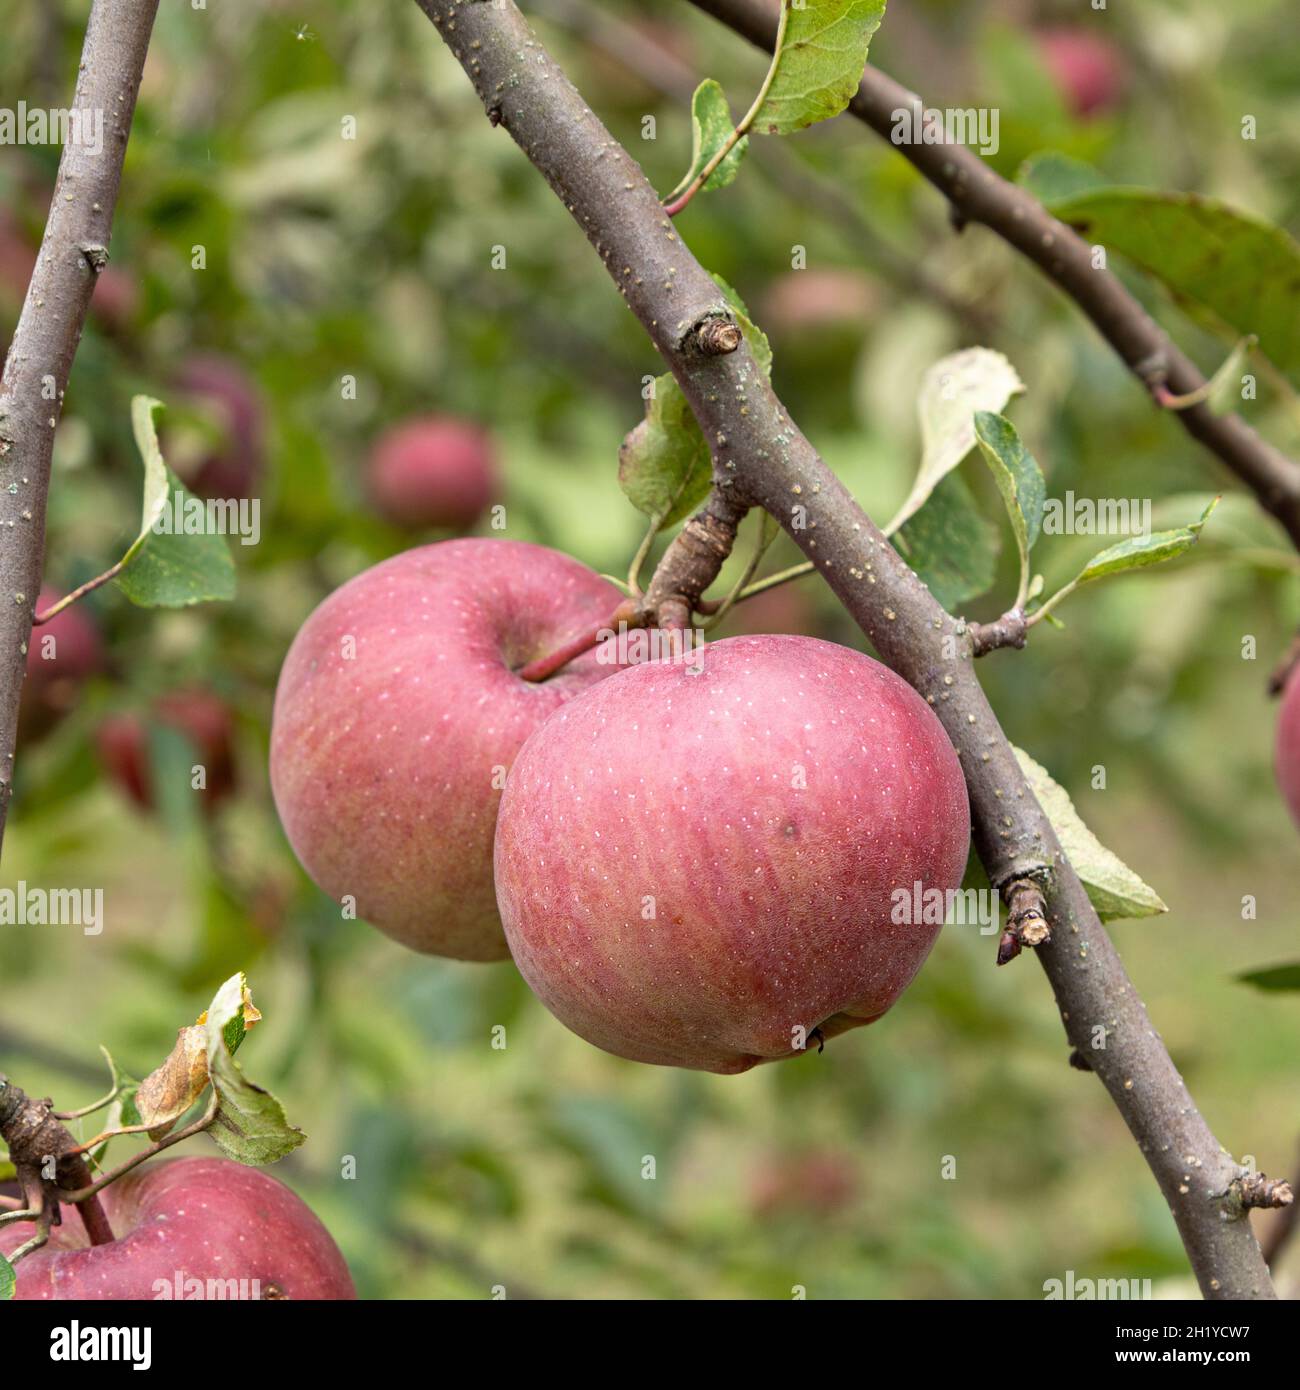 two red ripe apples hanging on branch against background of green foliage, fruits in garden, side view, close-up Stock Photo